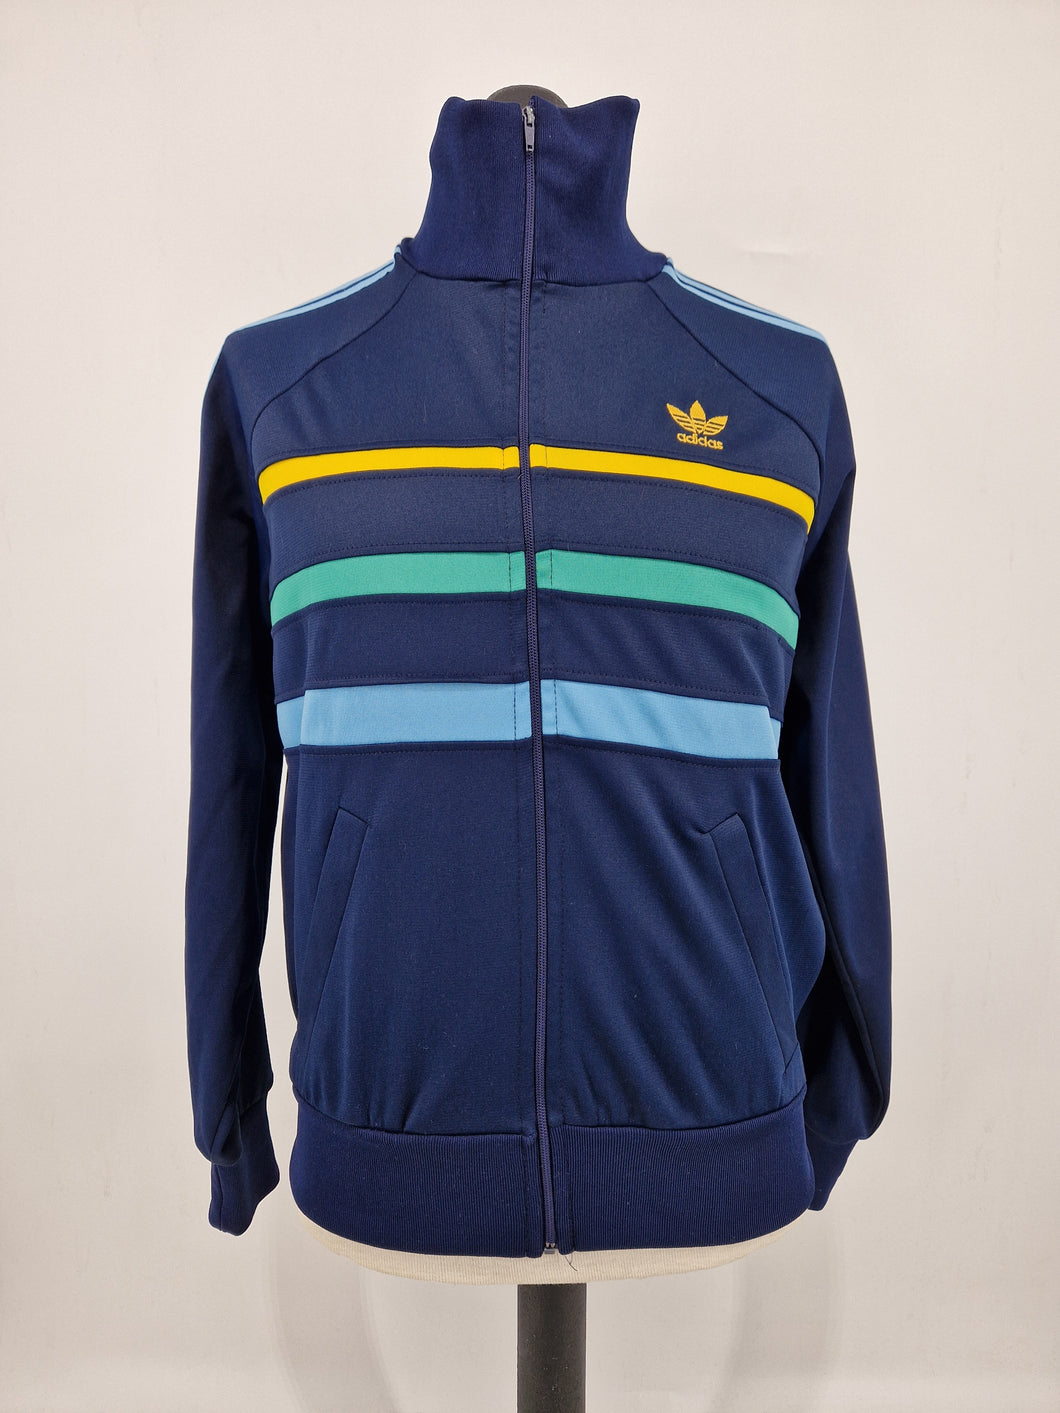 Adidas First Track Top 70s made in France Navy Yellow Green M